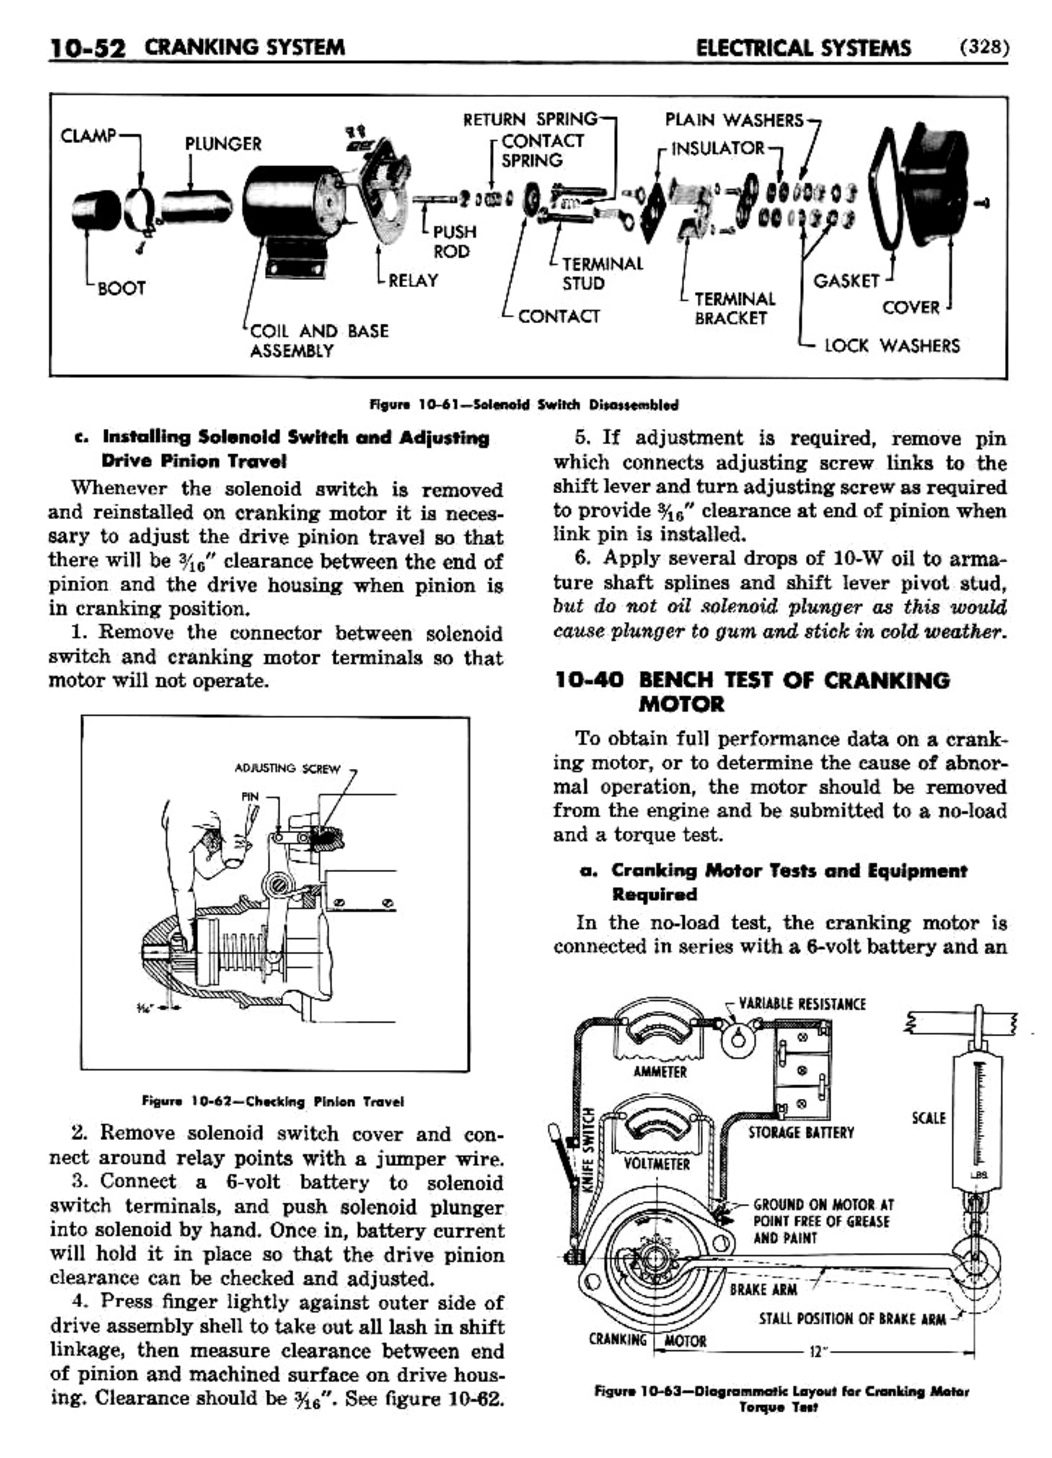 n_11 1948 Buick Shop Manual - Electrical Systems-052-052.jpg